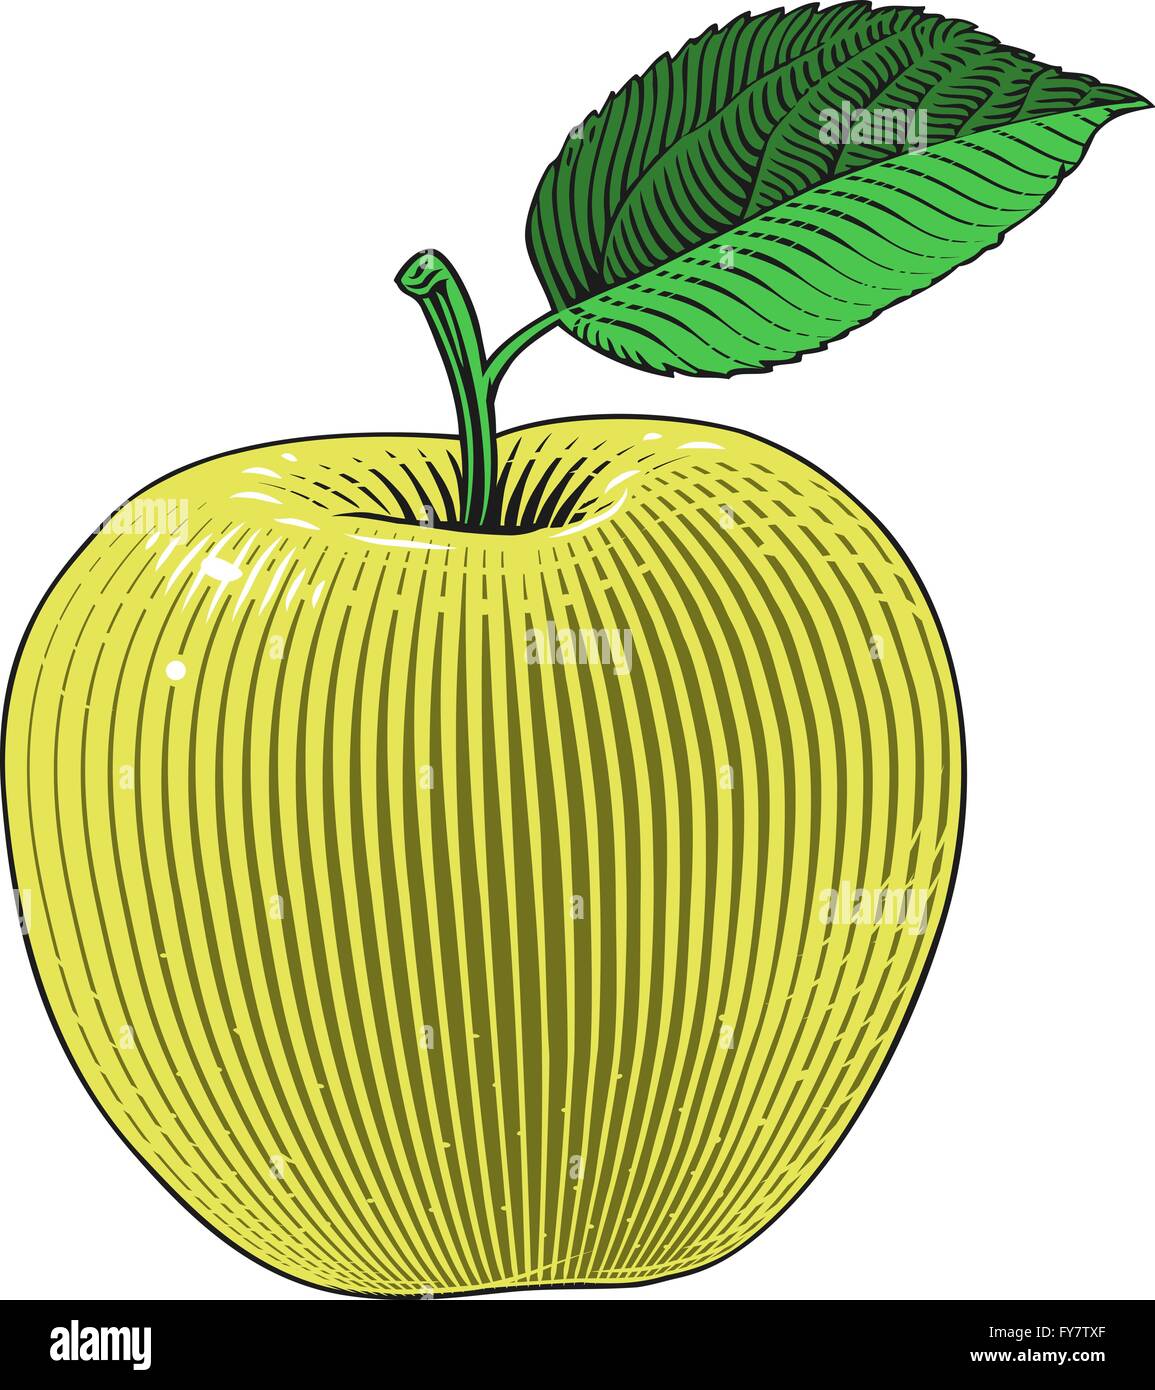 Apple in engraving style Stock Vector